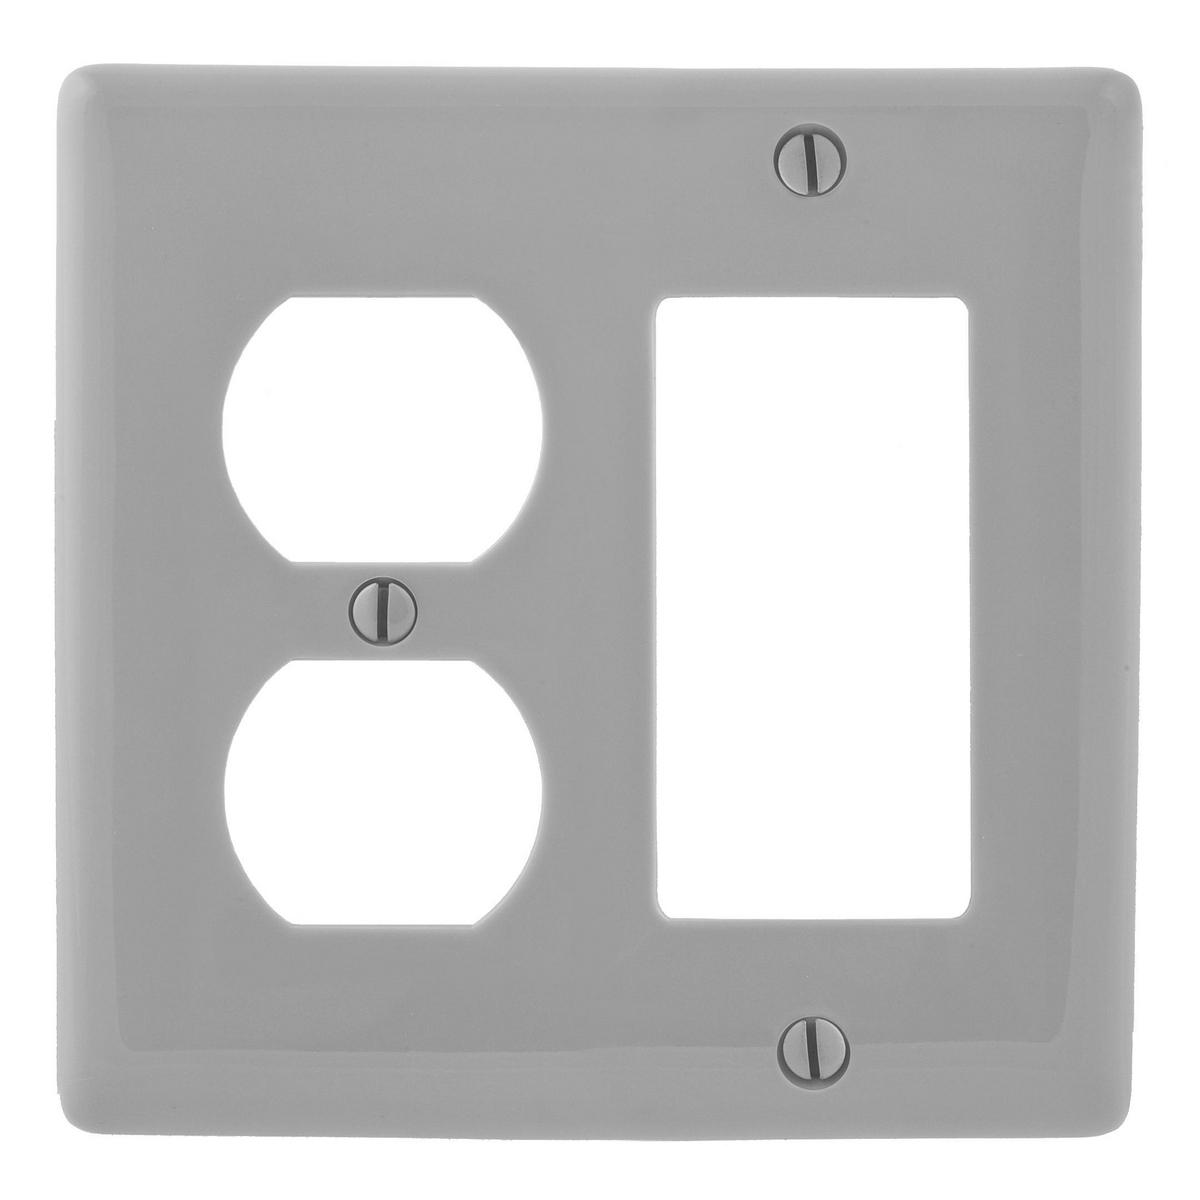 Hubbell NP826GY Wallplates and Box Covers, Wallplate, Nylon, 2-Gang, 1) Duplex 1) Decorator, Gray  ; Reinforcement ribs for extra strength ; High-impact, self-extinguishing nylon material ; Captive screw feature holds mounting screw in place ; Standard Size is 1/8" large